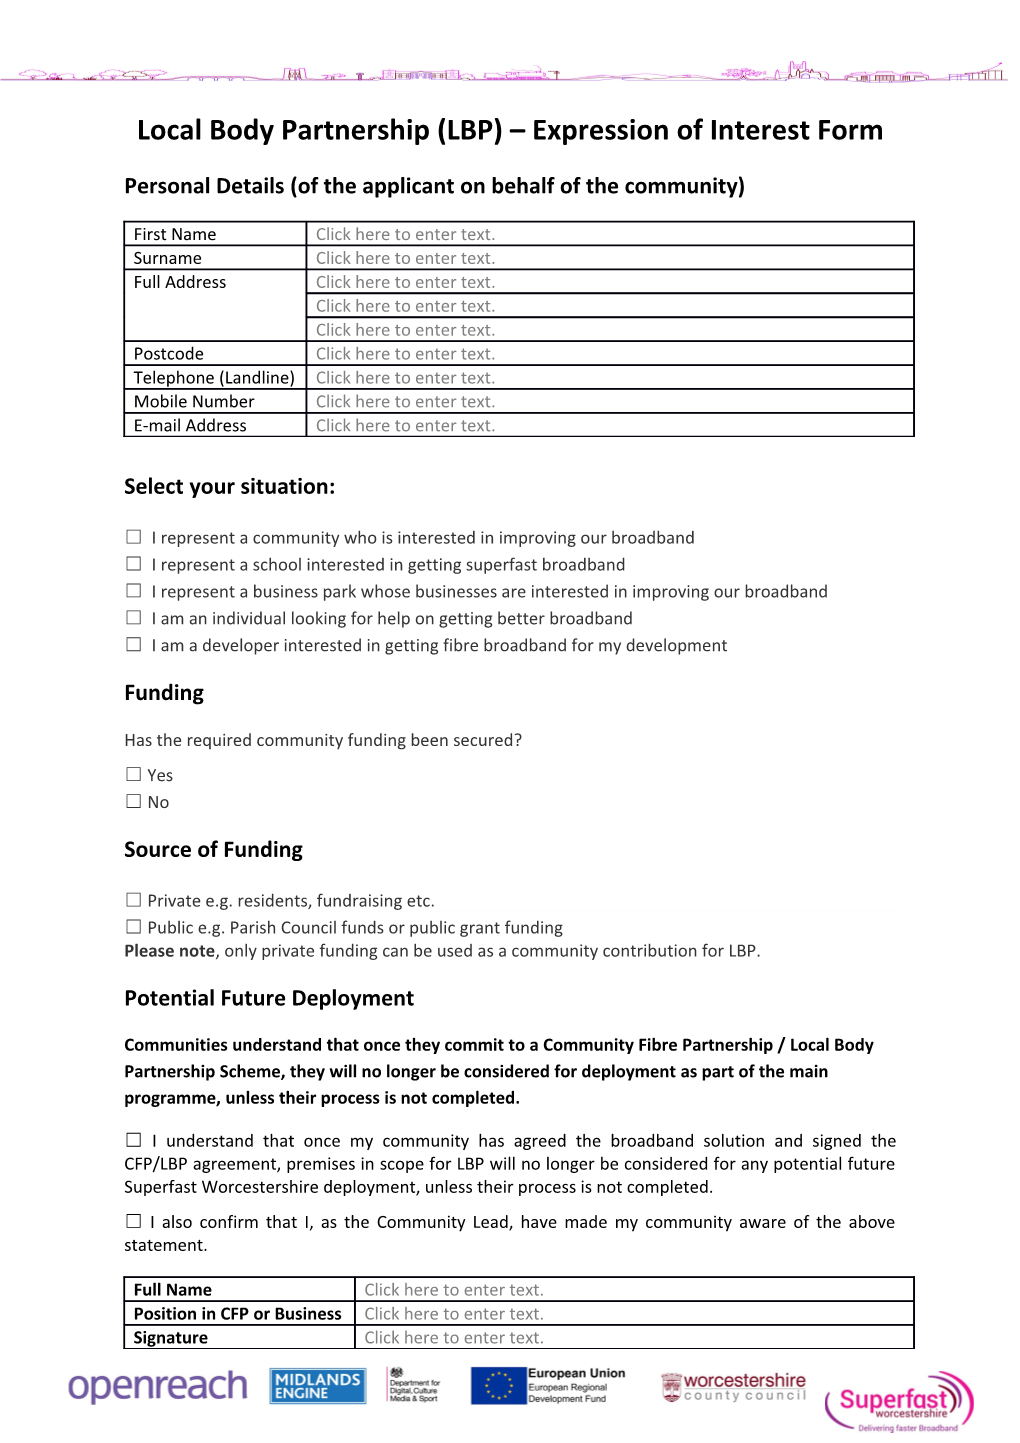 Local Body Partnership (LBP) Expression of Interest Form